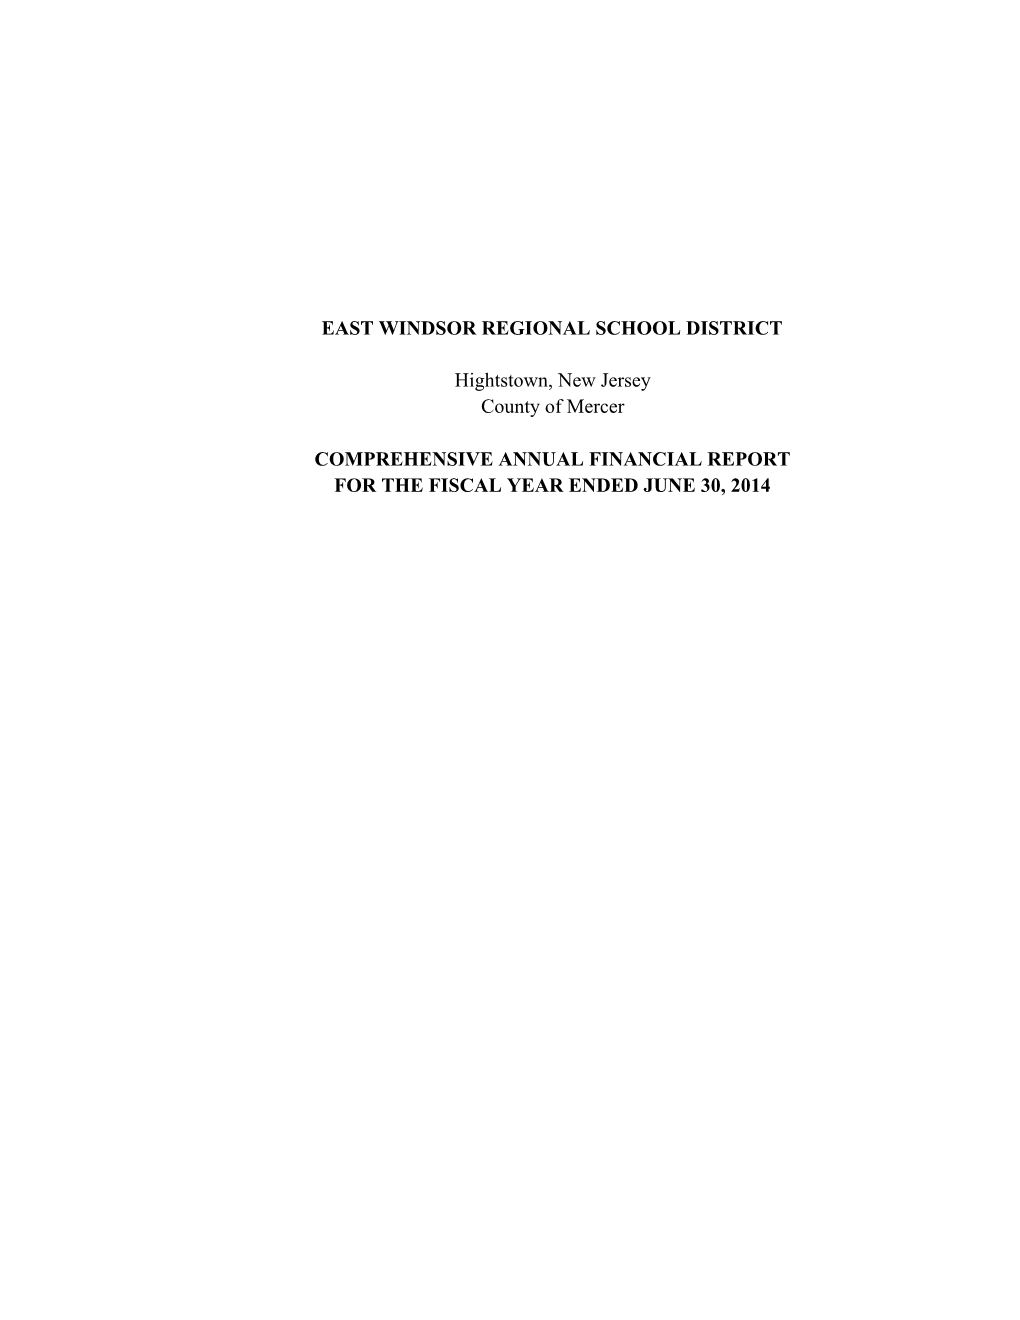 EAST WINDSOR REGIONAL SCHOOL DISTRICT Hightstown, New Jersey County of Mercer COMPREHENSIVE ANNUAL FINANCIAL REPORT for the FISC